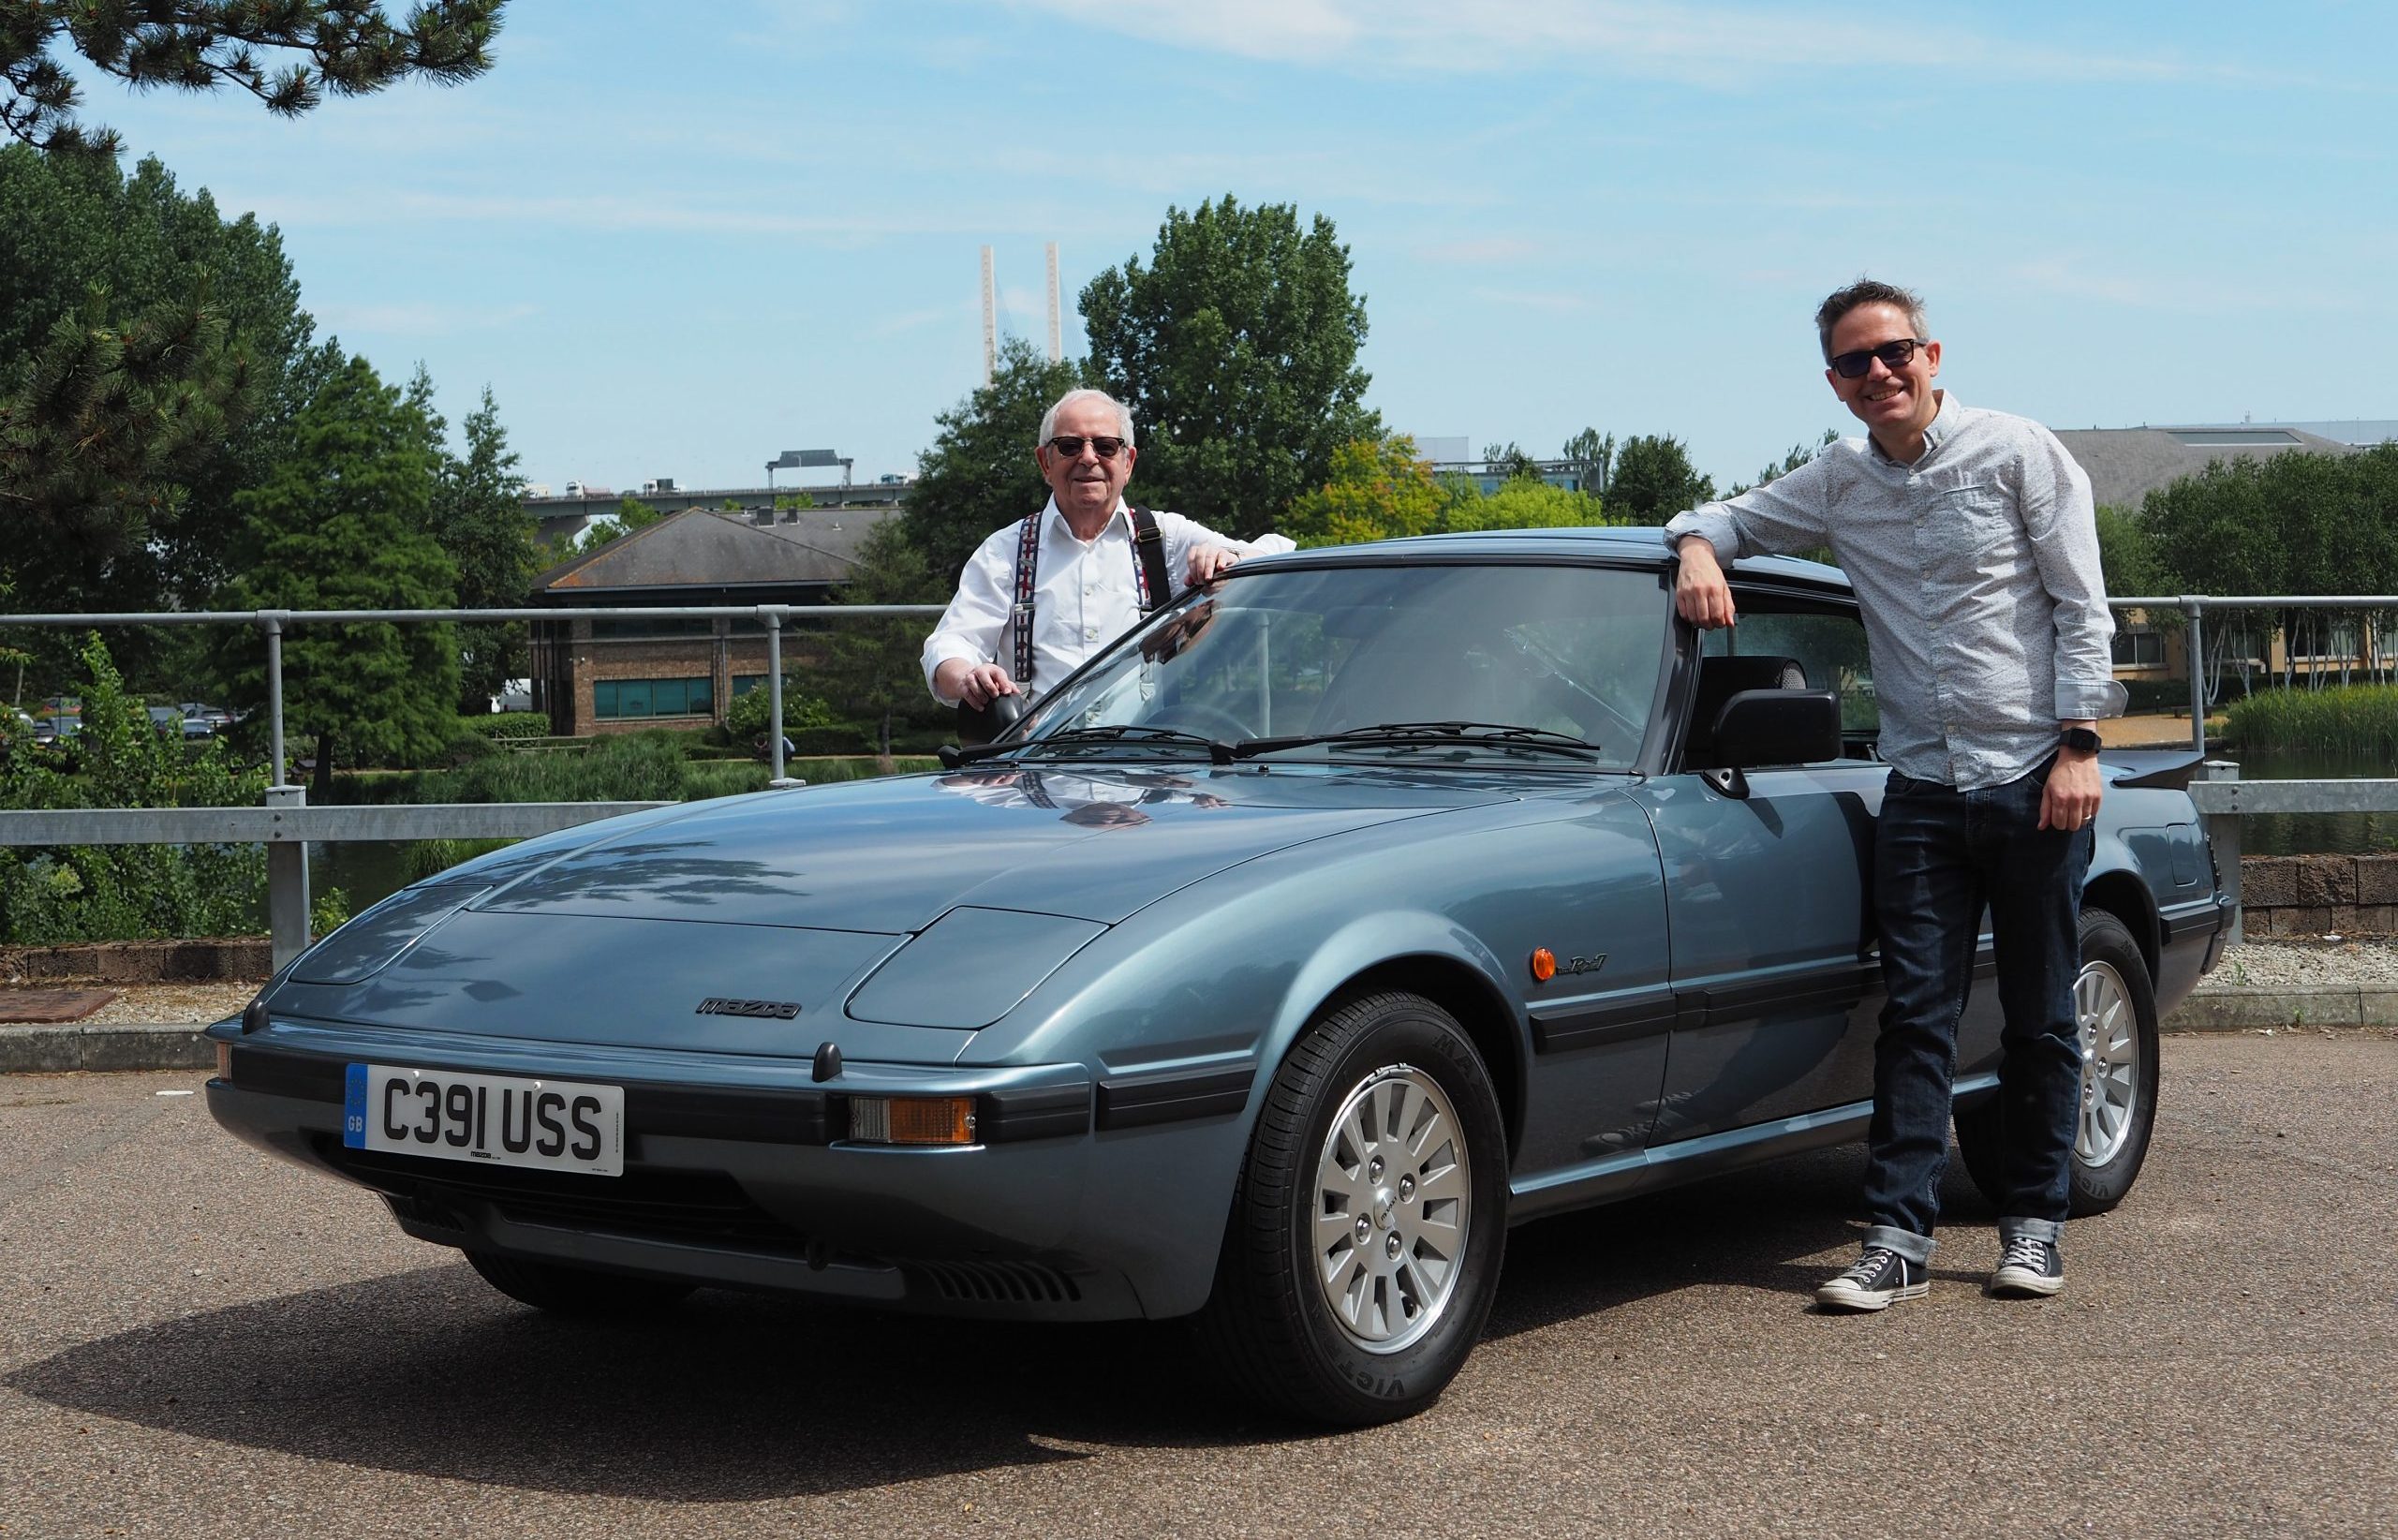 40 years ago my dad bought a Mazda RX-7 and now we’ve all been reunited